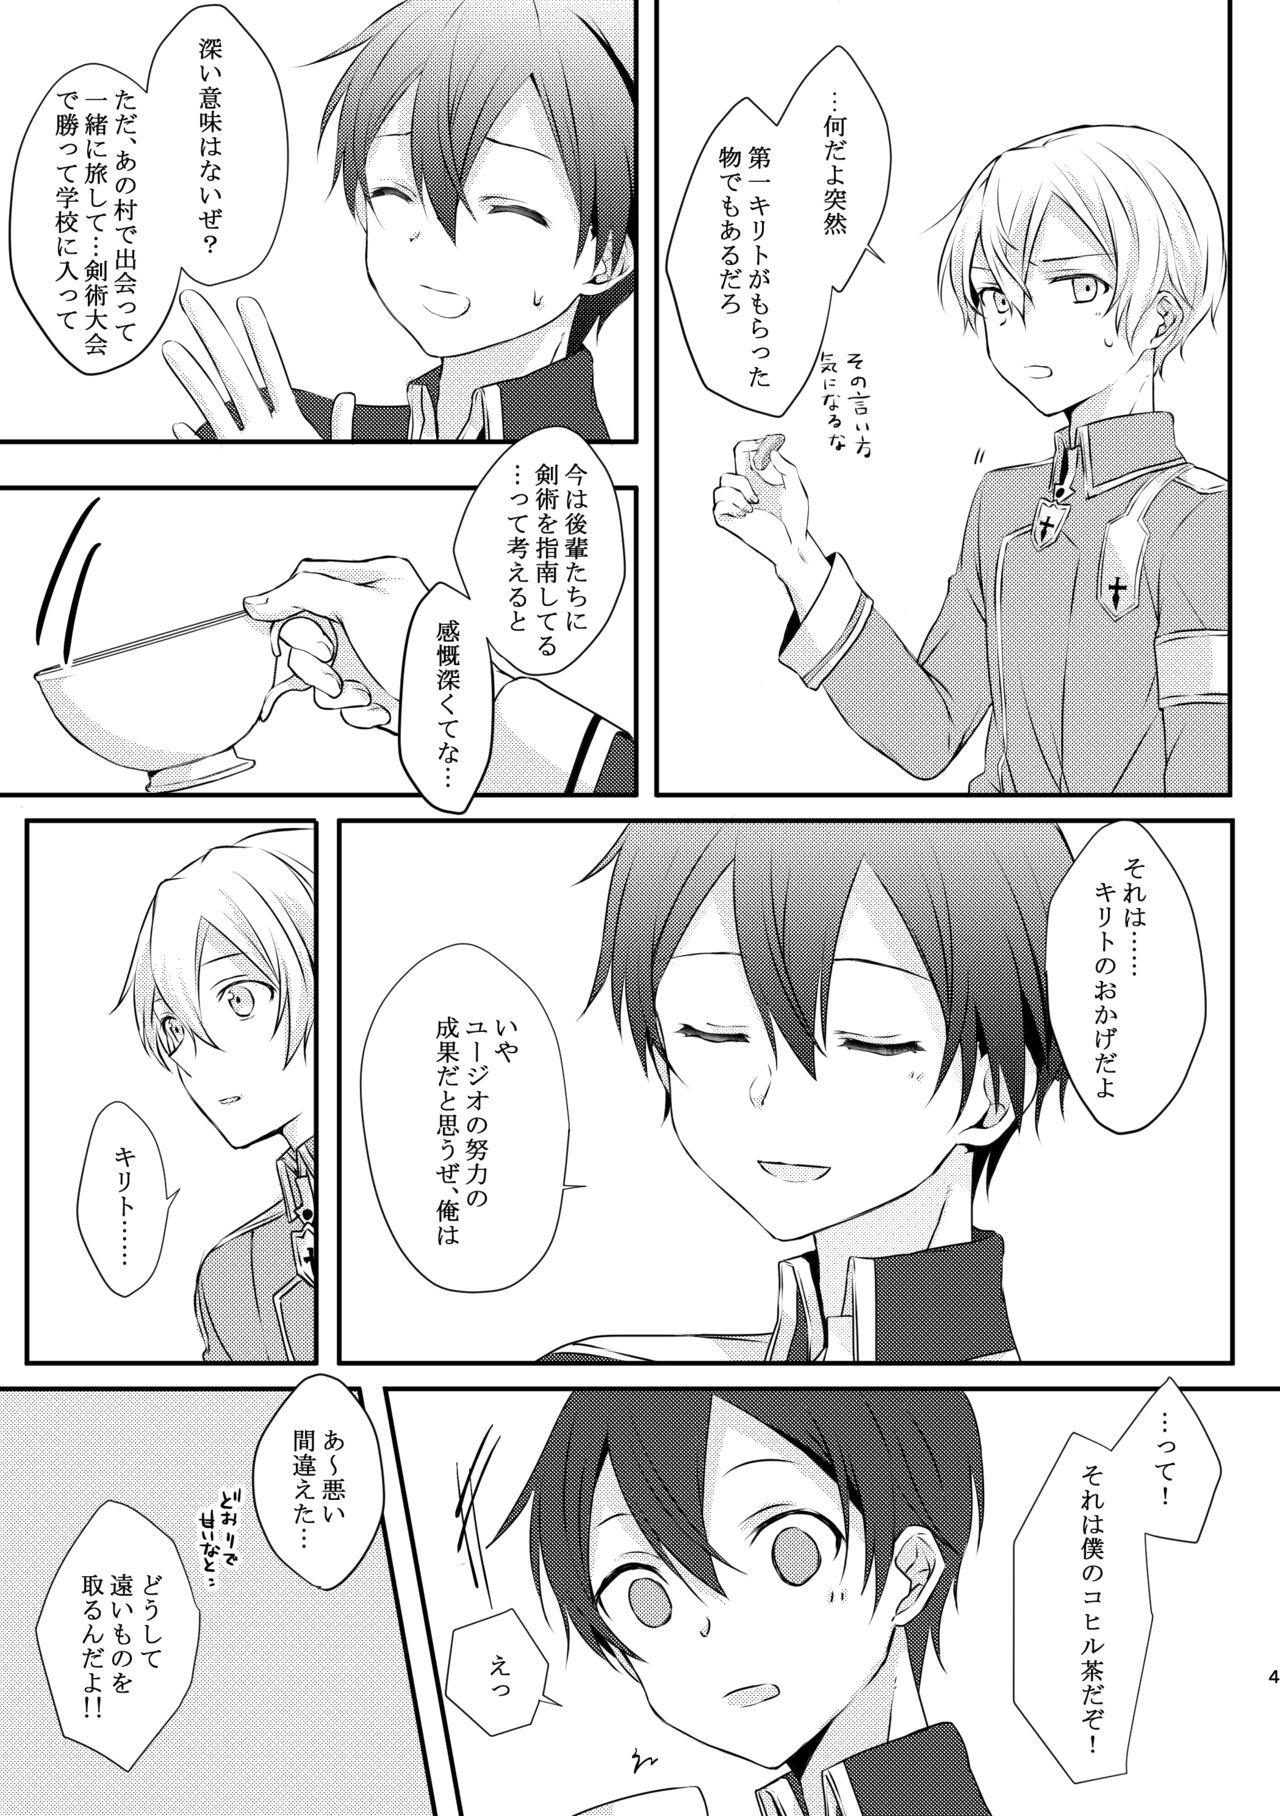 Gay Skinny 触手ちゃんはユジキリが羨ましい！ - Sword art online Pool - Picture 3